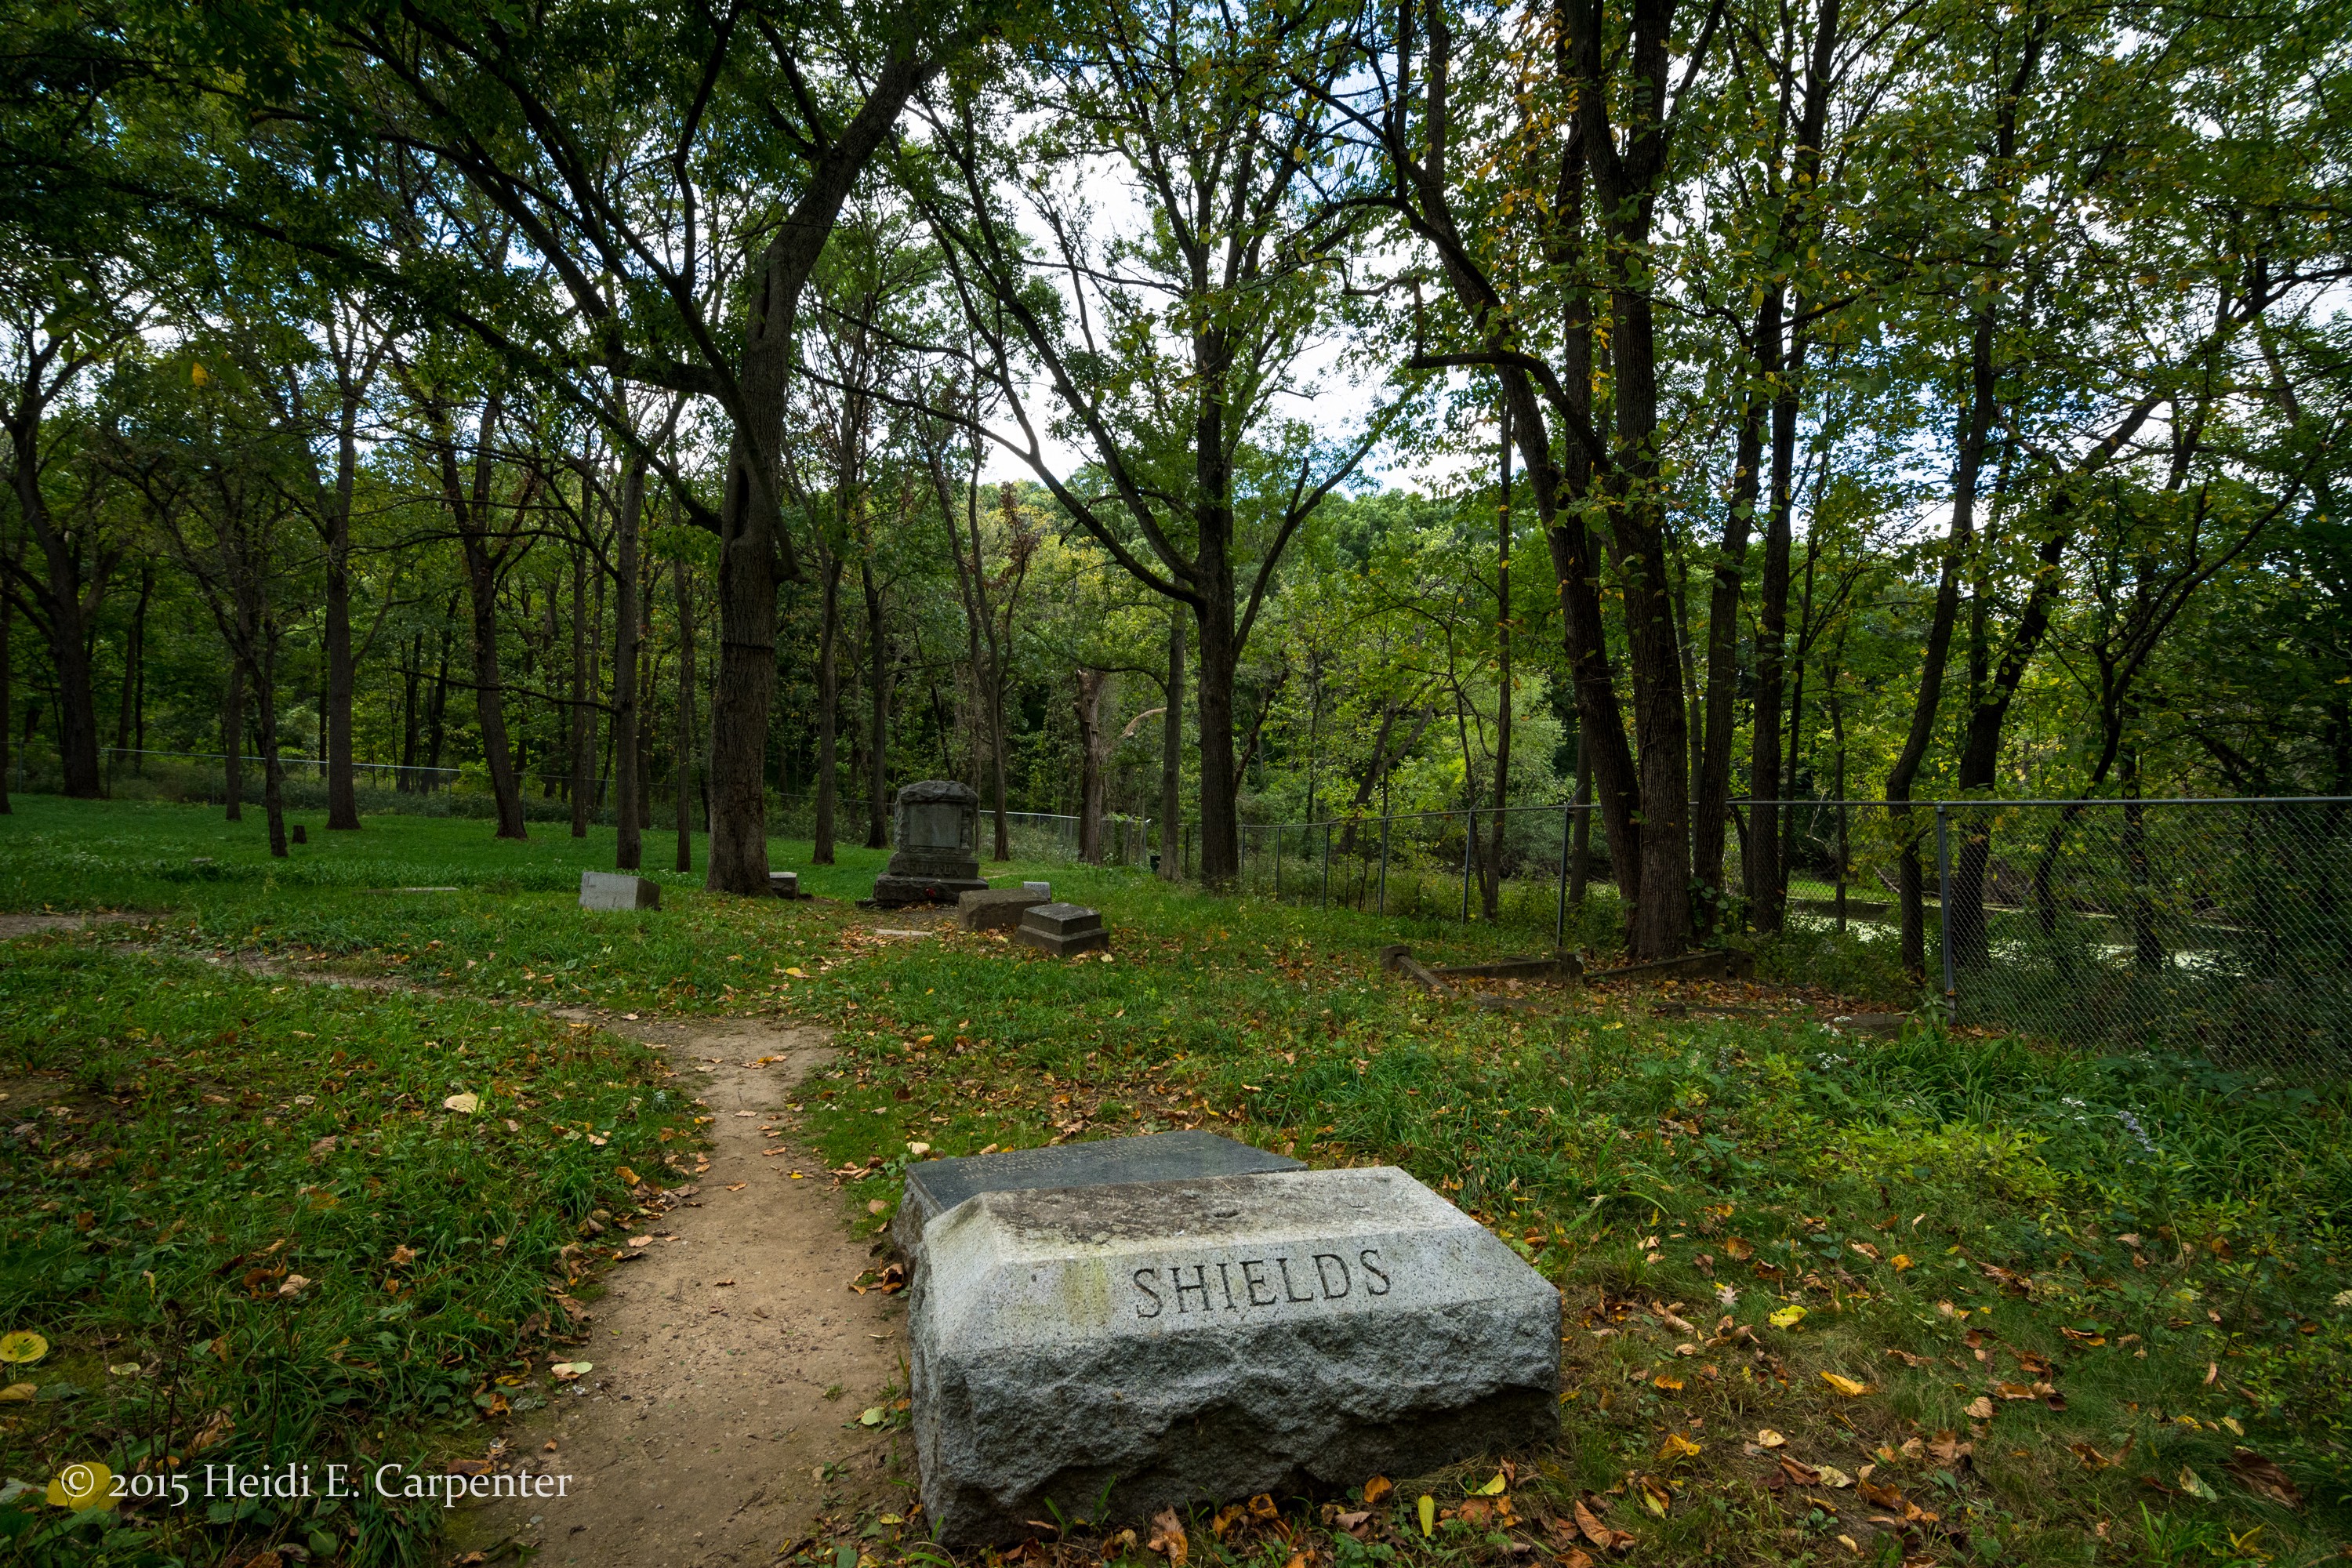 Decades of curious visitors have worn paths around the toppled and missing headstones of Bachelor?s Grove Cemetery.